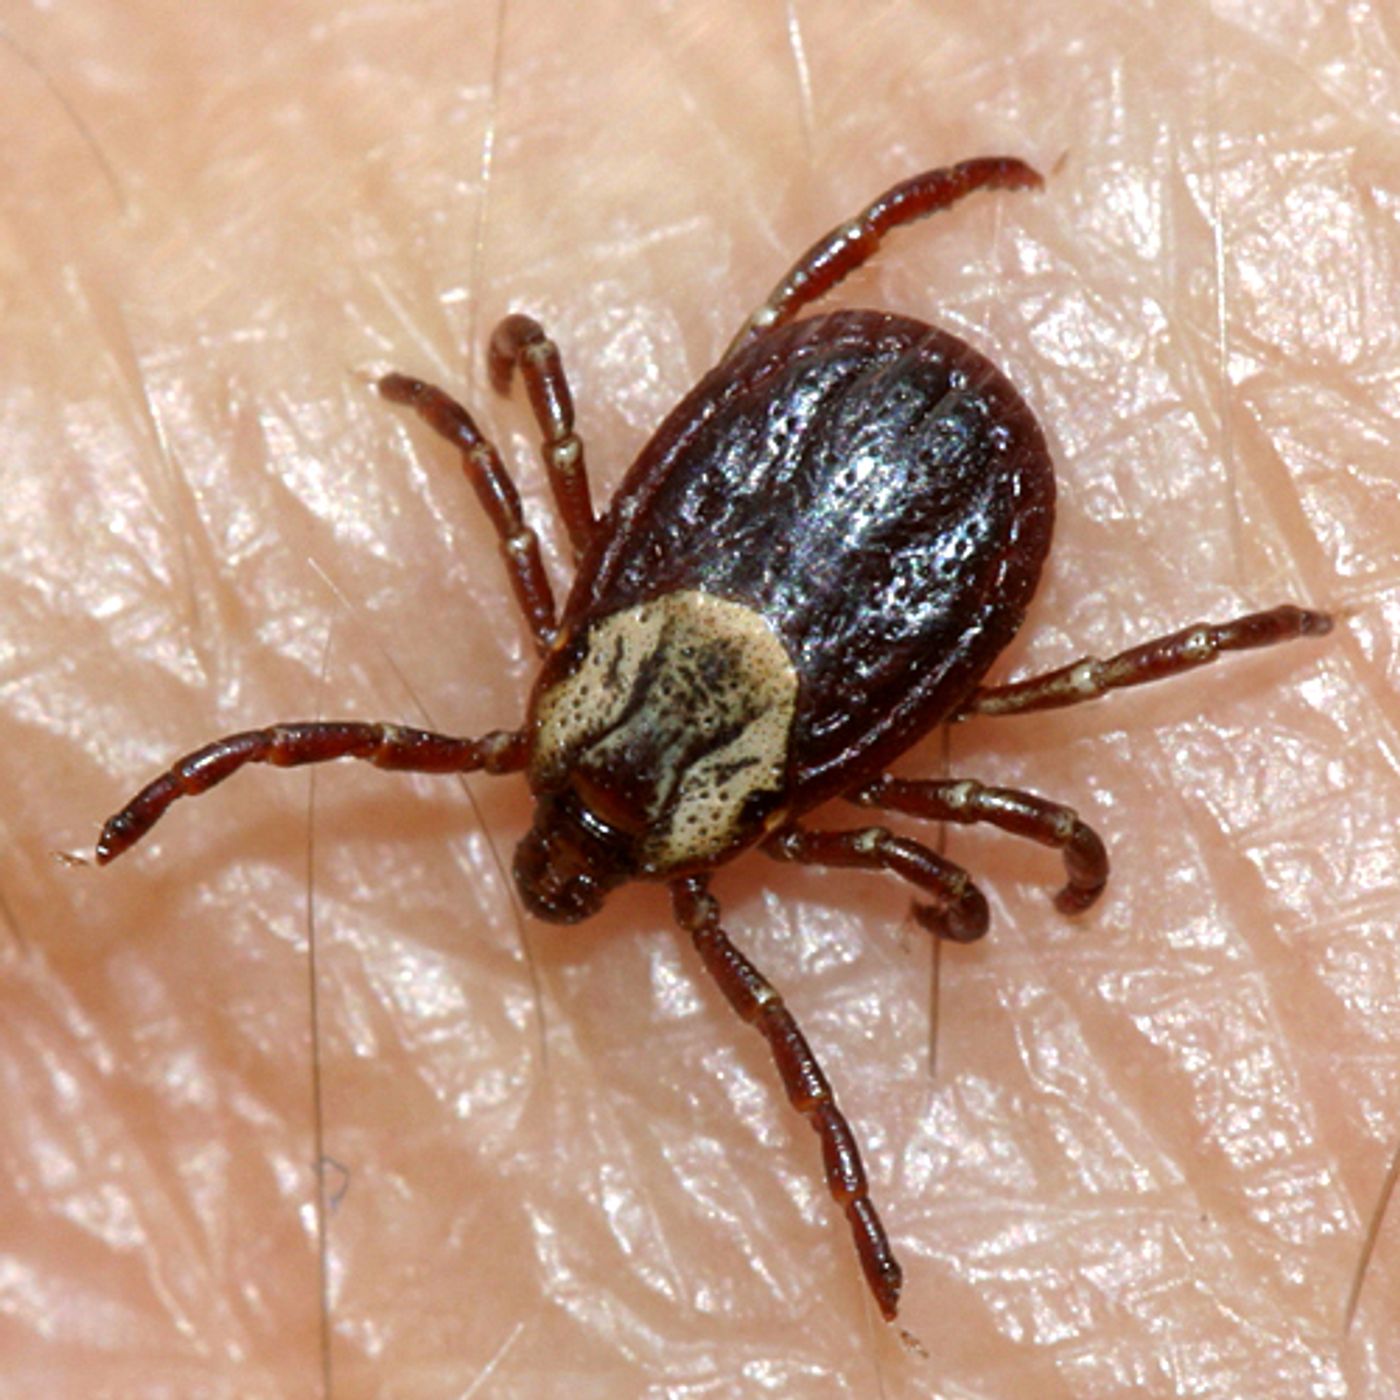 The American dog tick is known to transmit Rocky Mountain Spotted Fever in 5 American states.